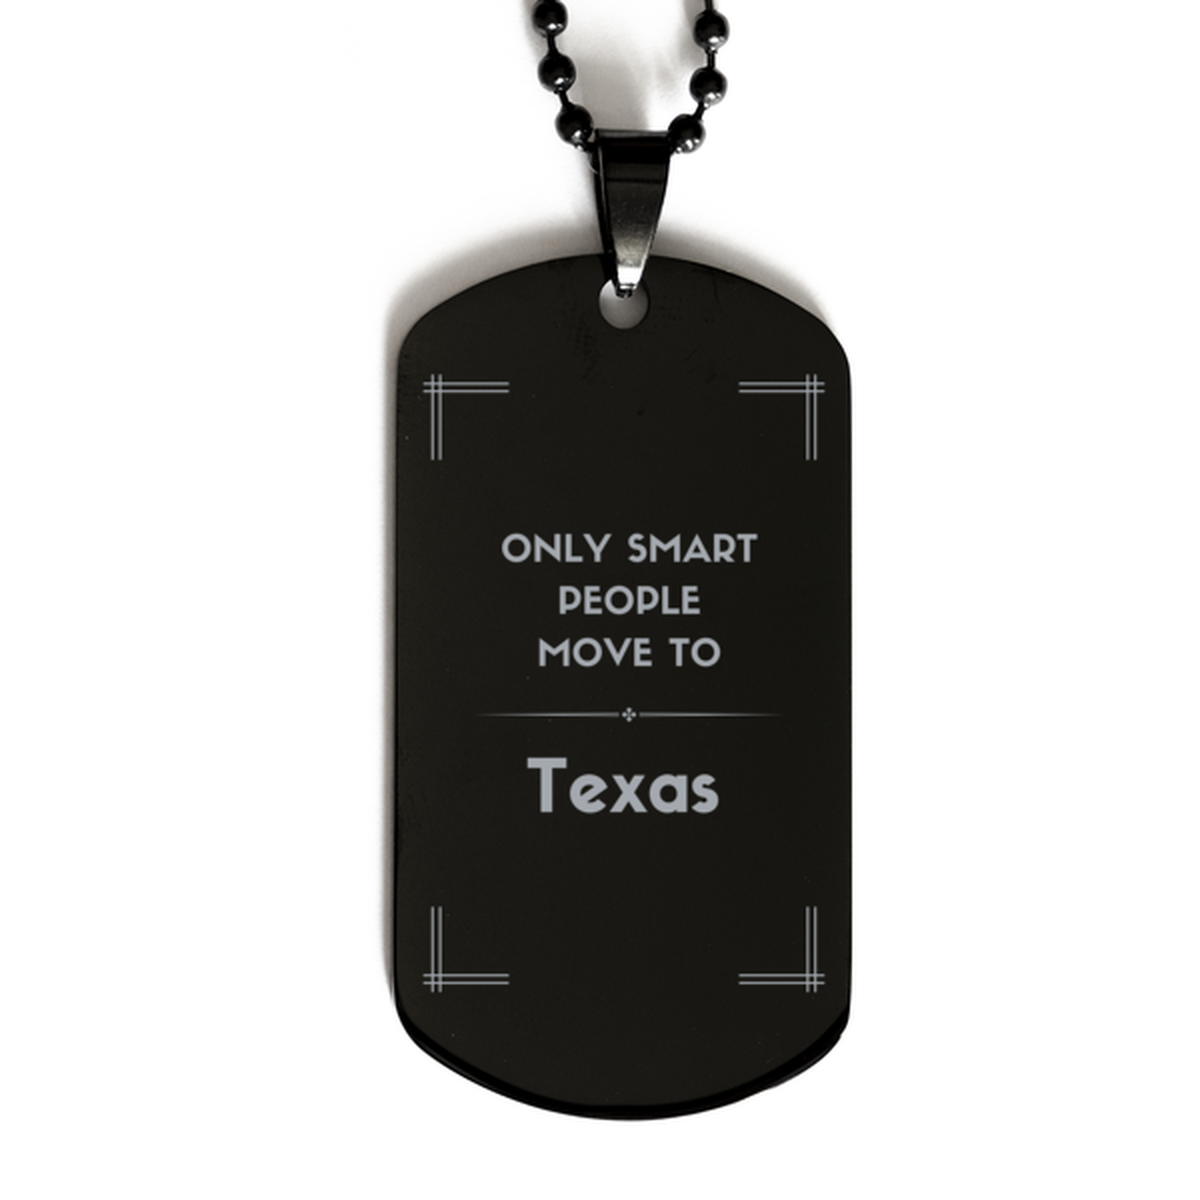 Only smart people move to Texas Black Dog Tag, Gag Gifts For Texas, Move to Texas Gifts for Friends Coworker Funny Saying Quote